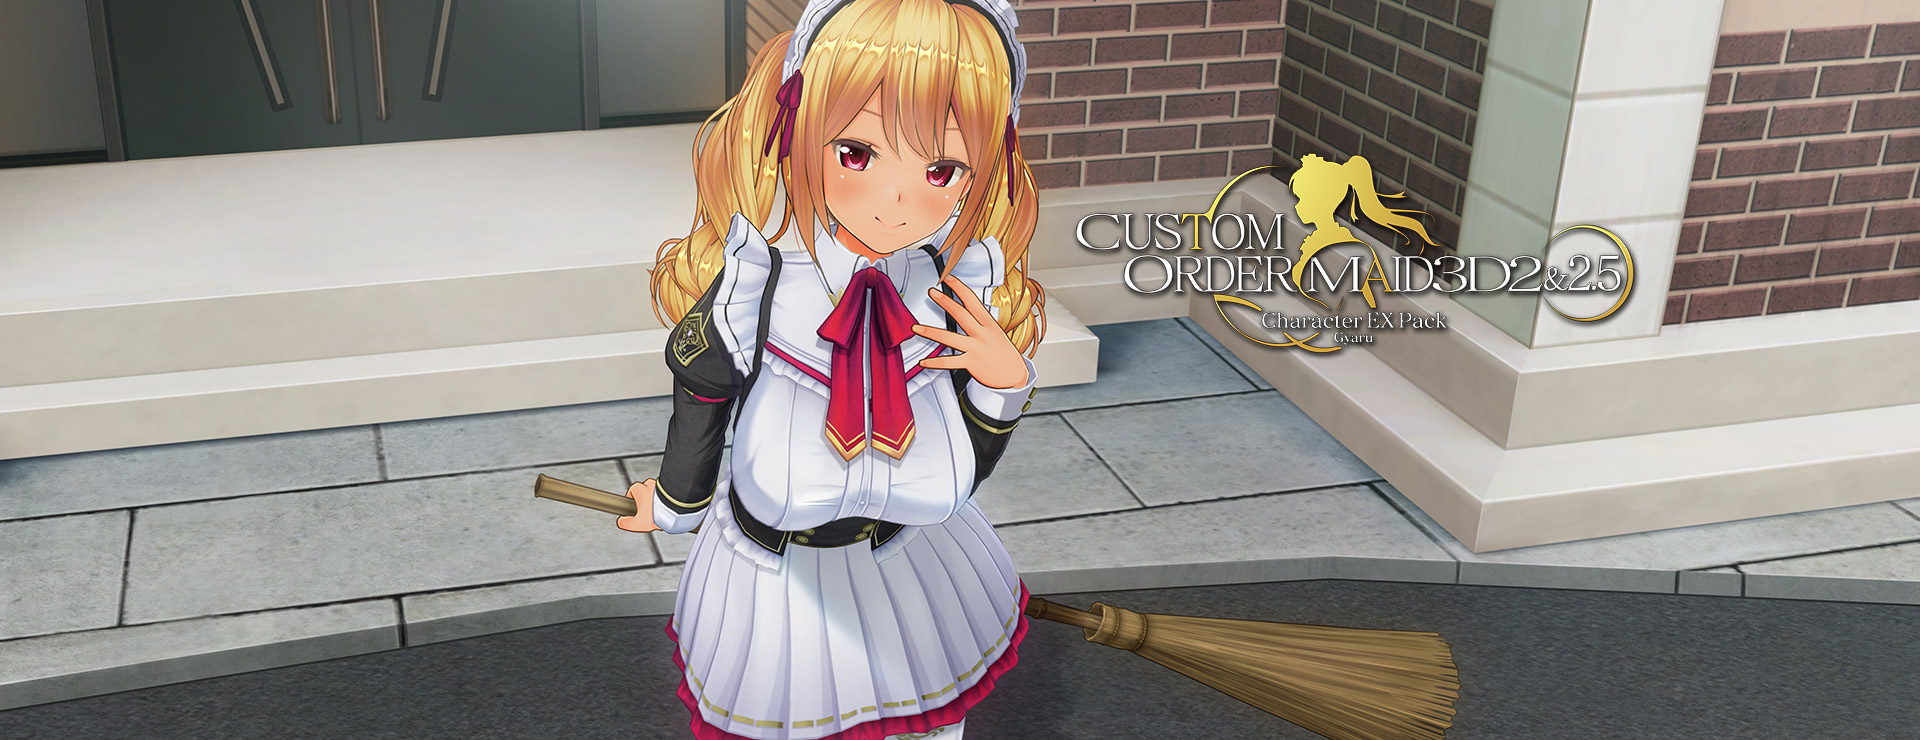 Custom Order Maid 3D 2: Character EX Pack Gyaru High Poly All In One Edition - Simulation Jeu